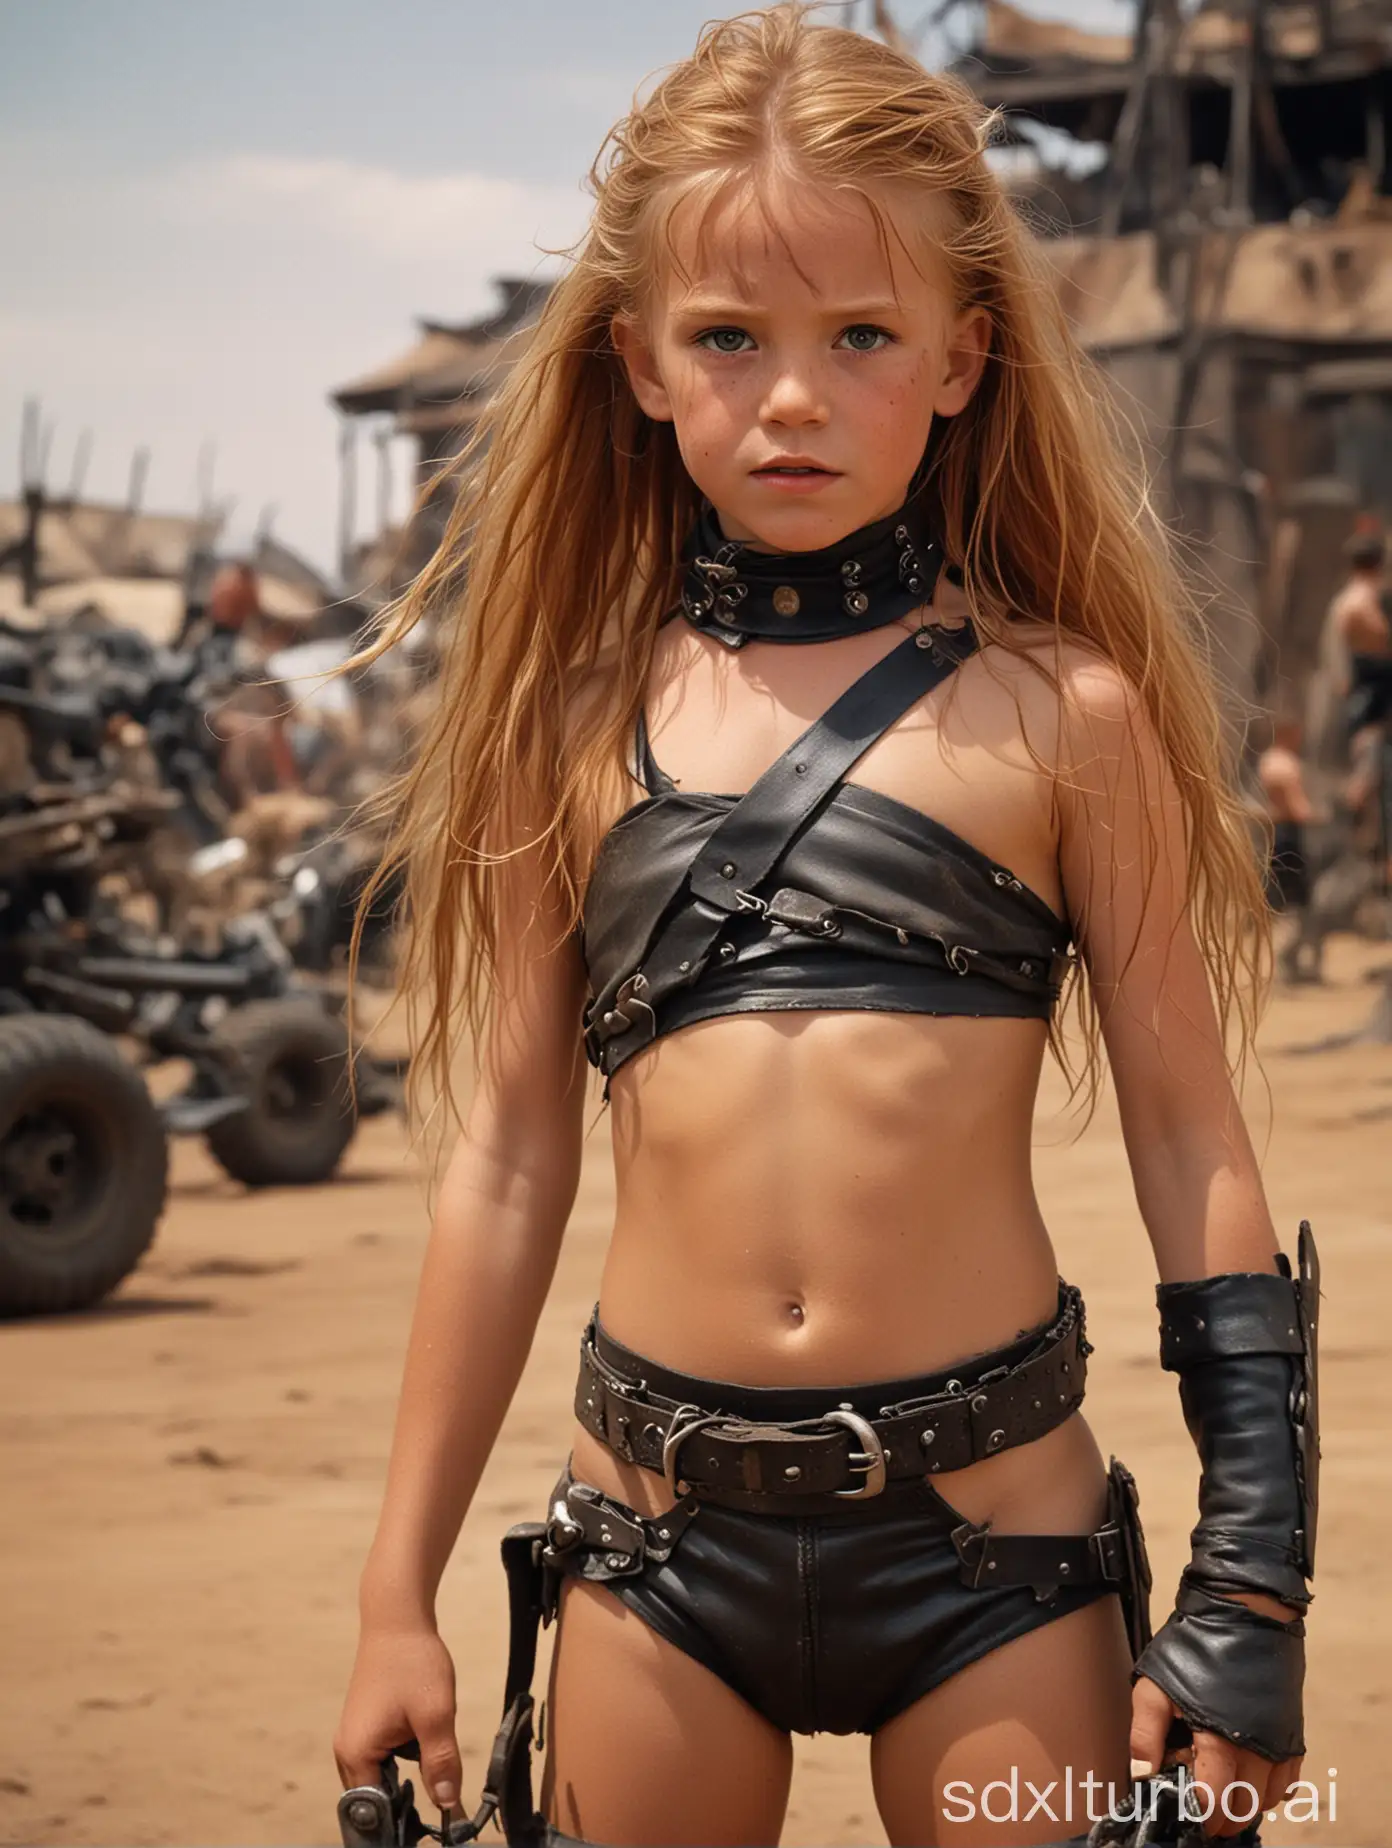 8 year old girl, leather bikini, choker, long ginger hair, extremely muscular abs, in Mad Max Beyond Thunderdome